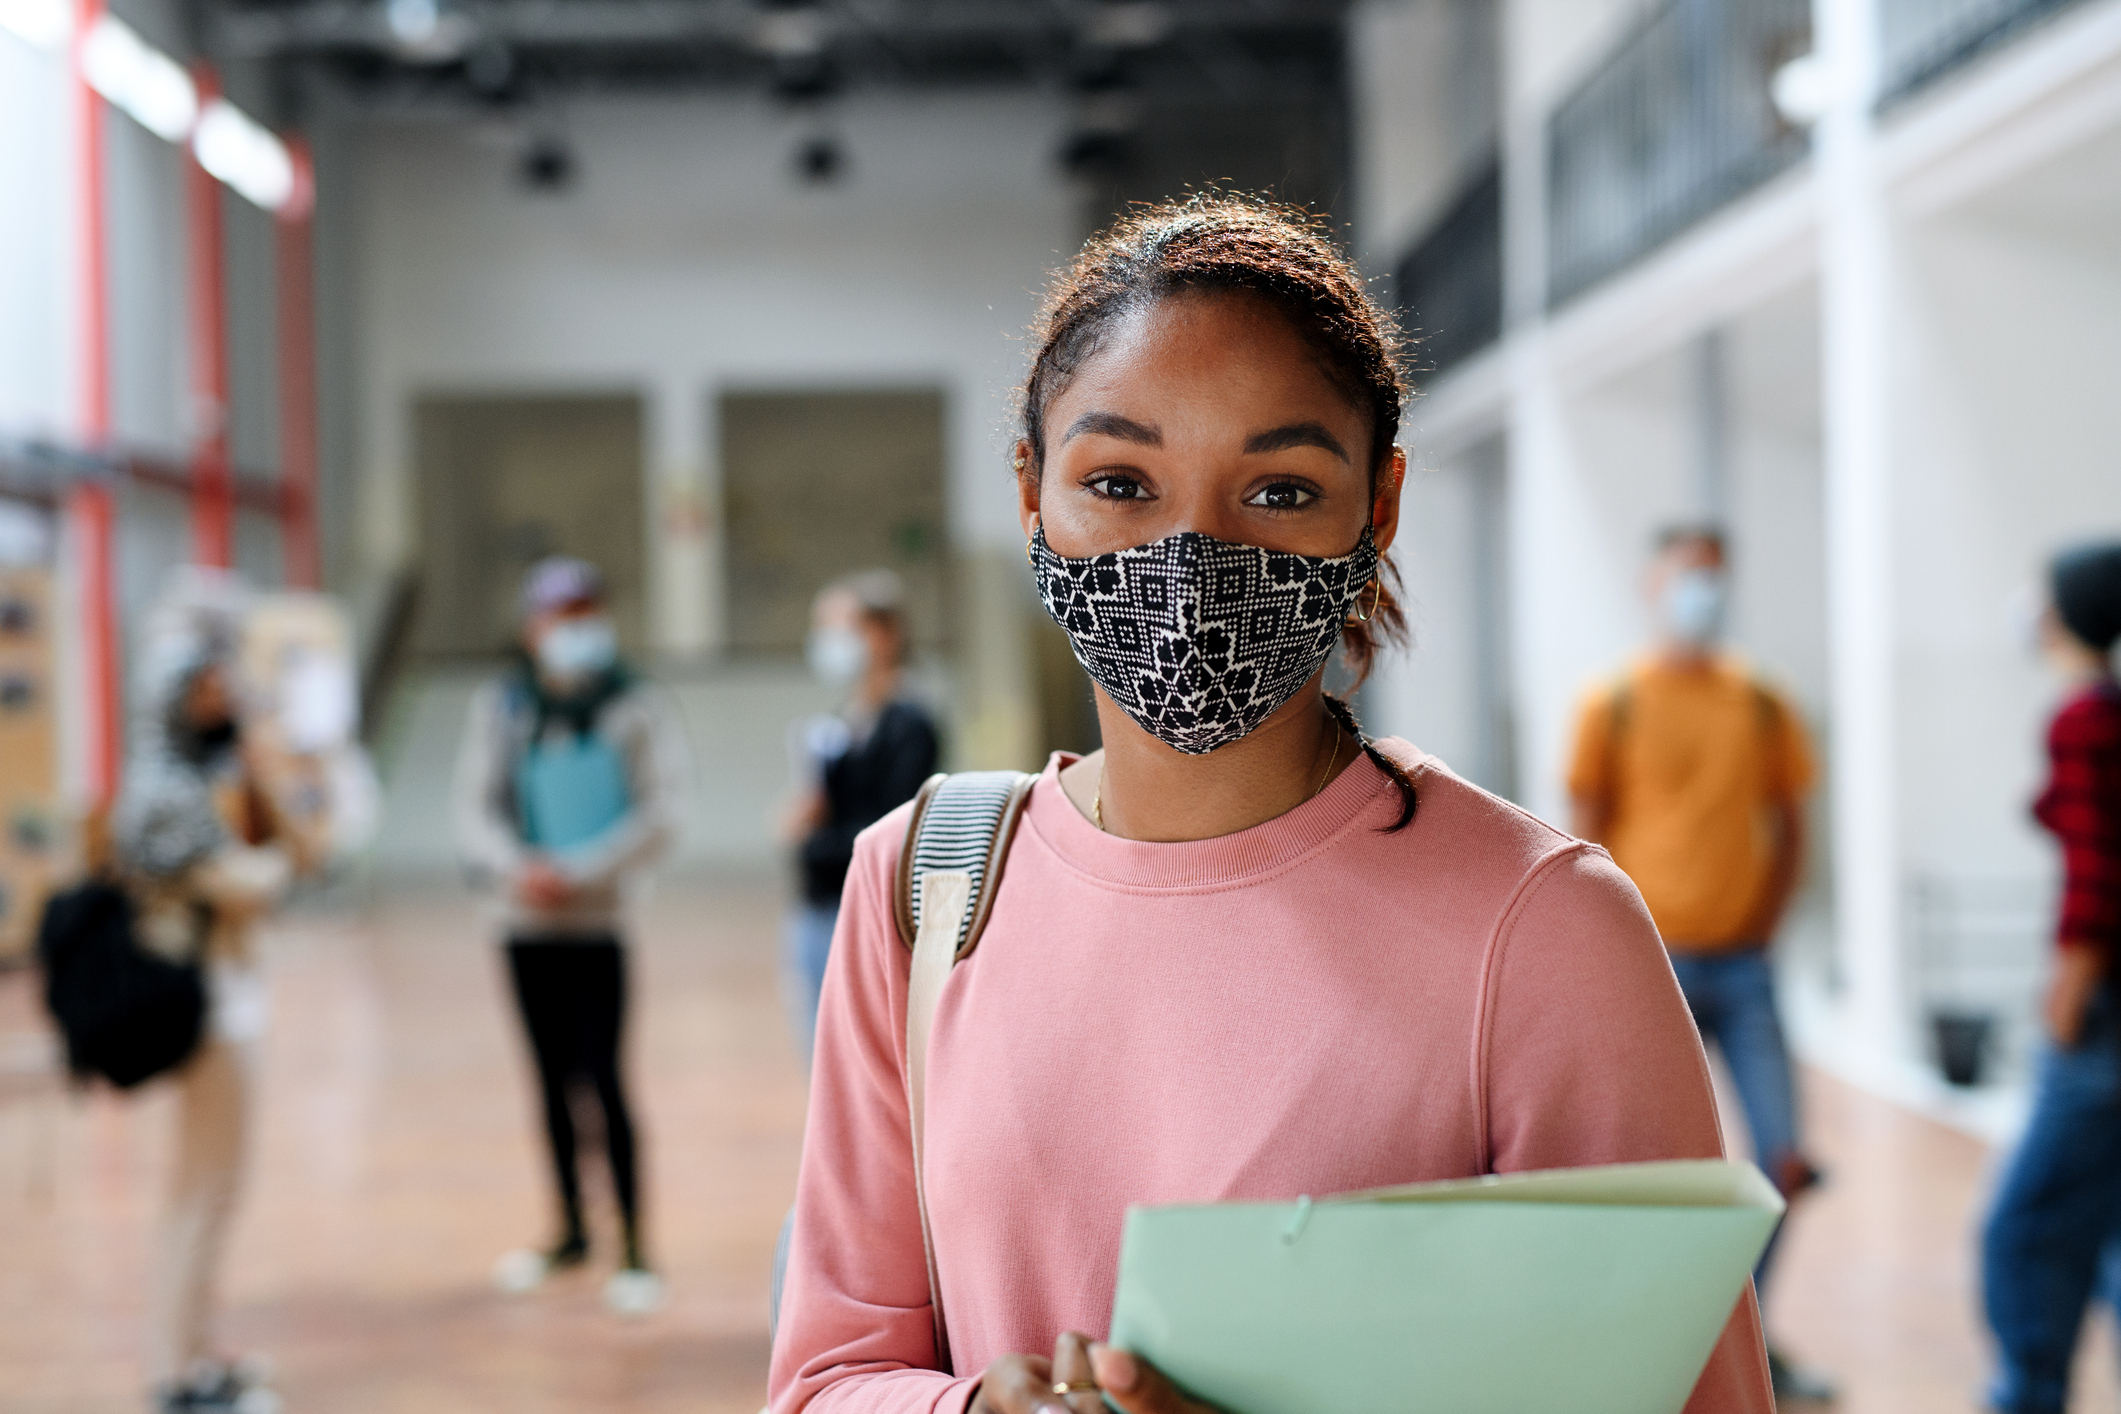 Student in school wearing a mask